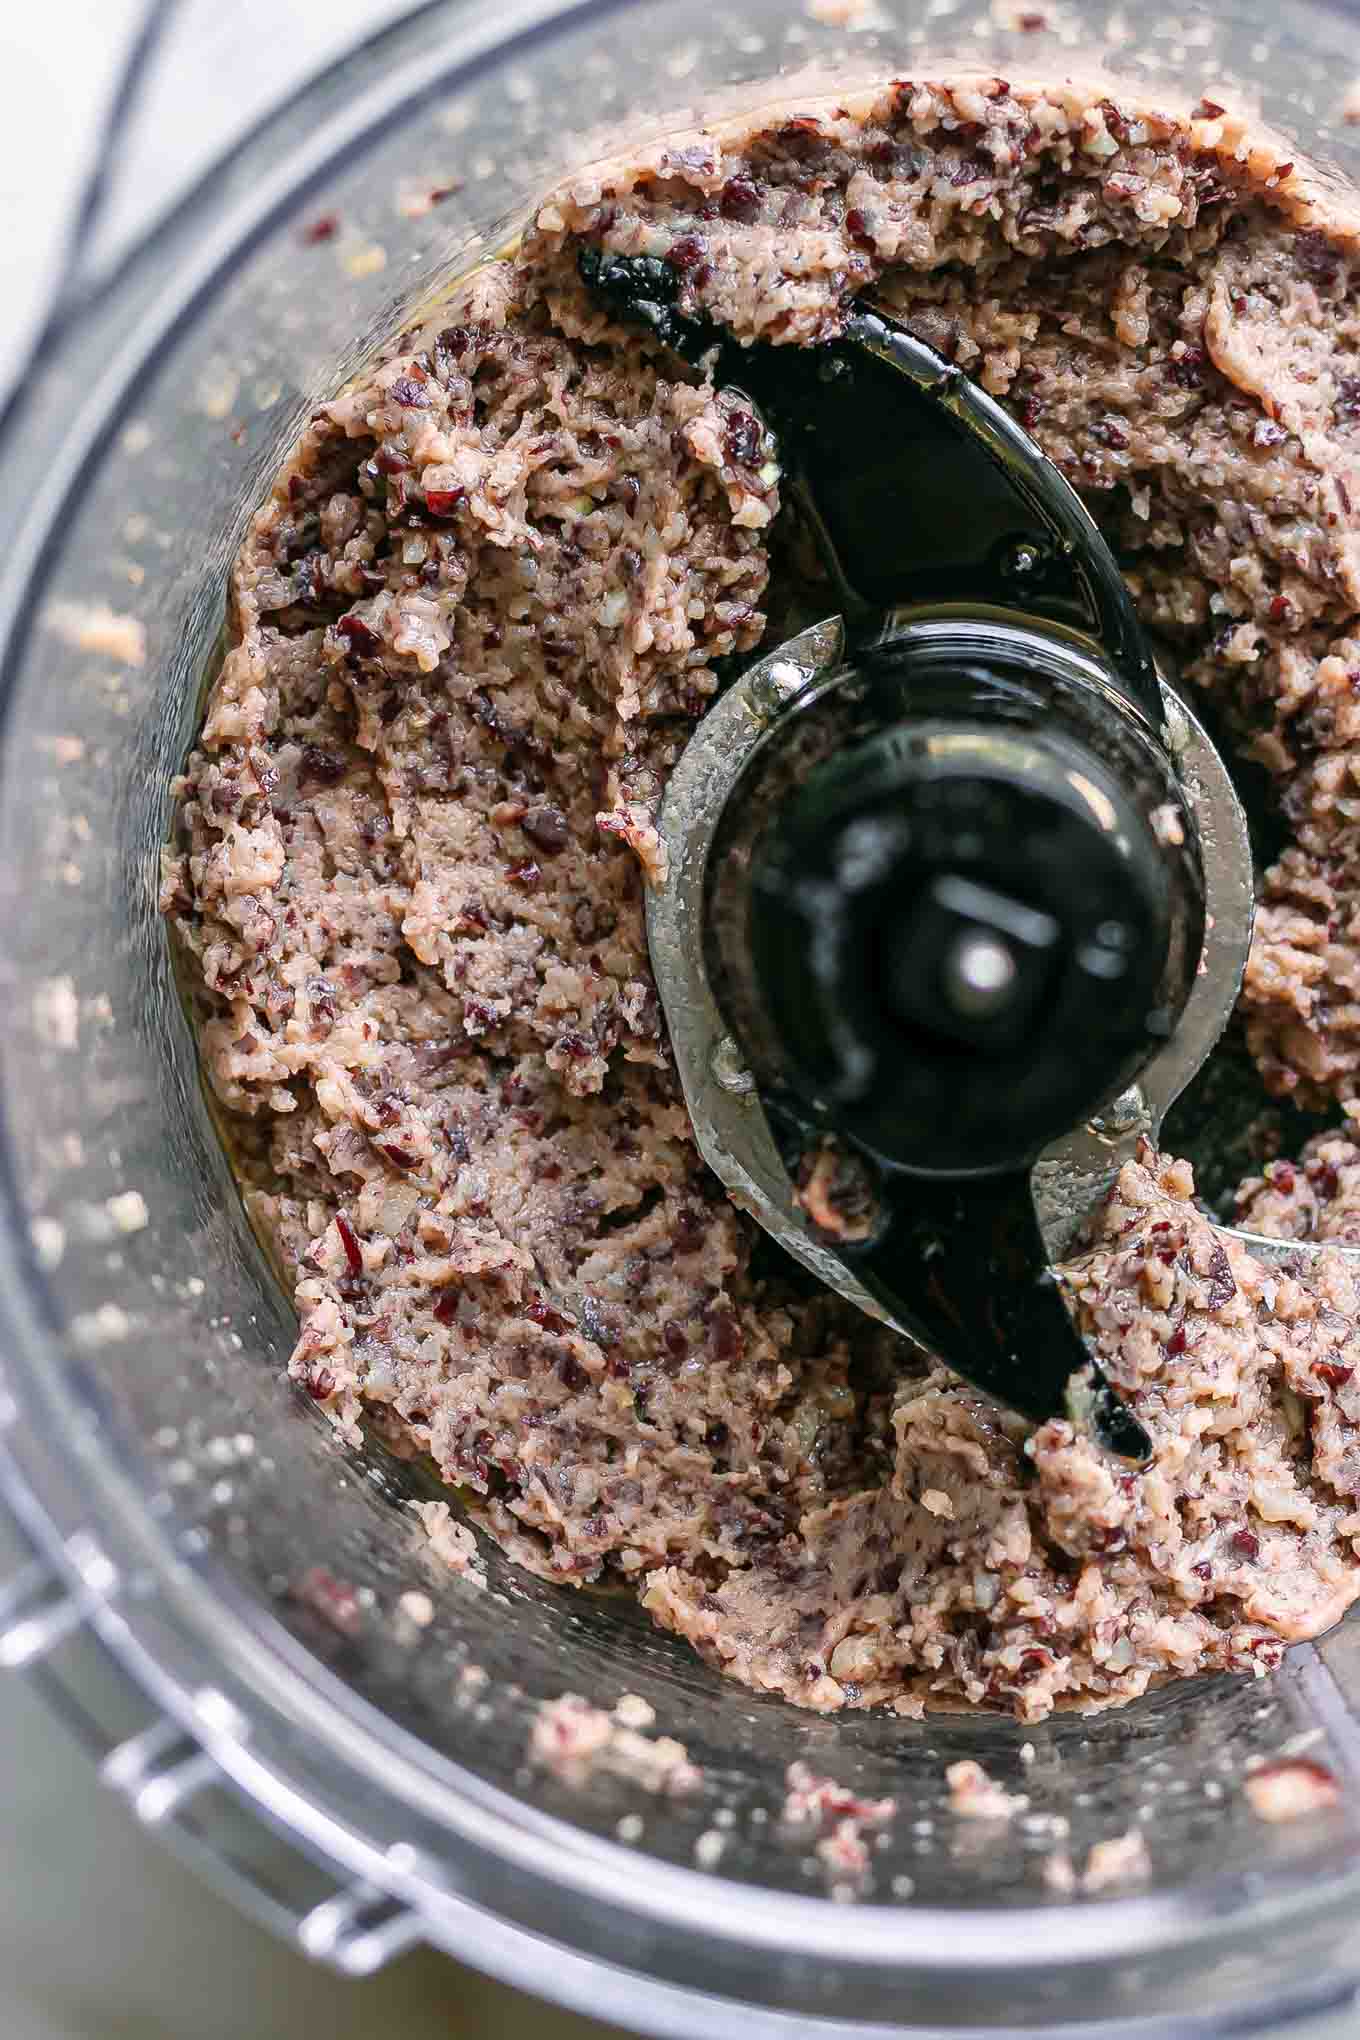 blended hummus made with kidney beans inside a food processor